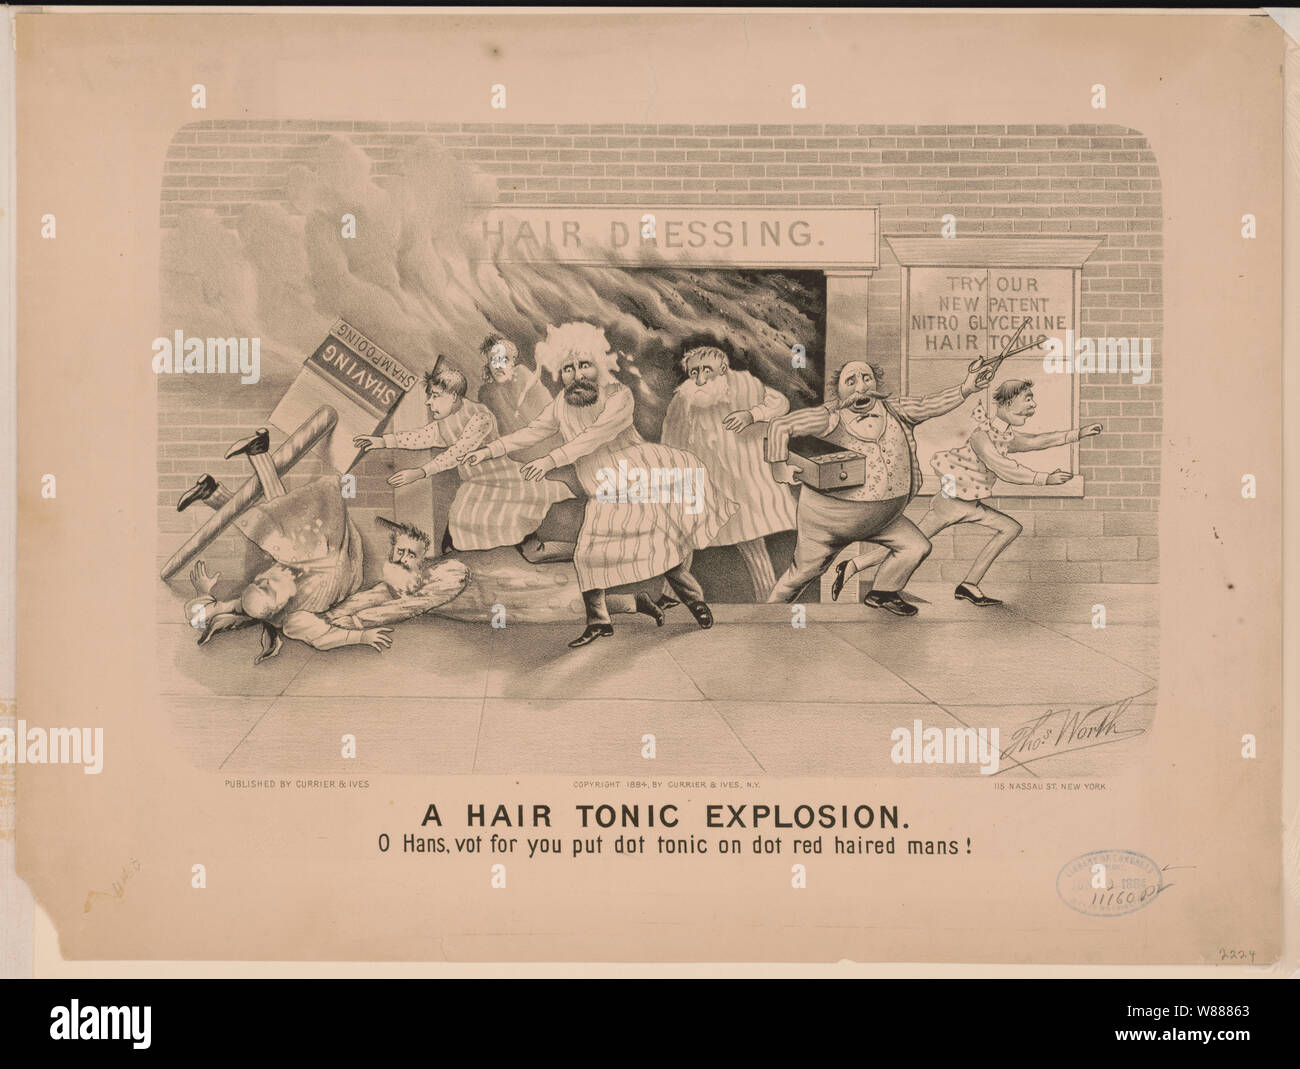 A  hair tonic explosion: o Hans, vot for you put dot tonic on dot red haired mans! Stock Photo